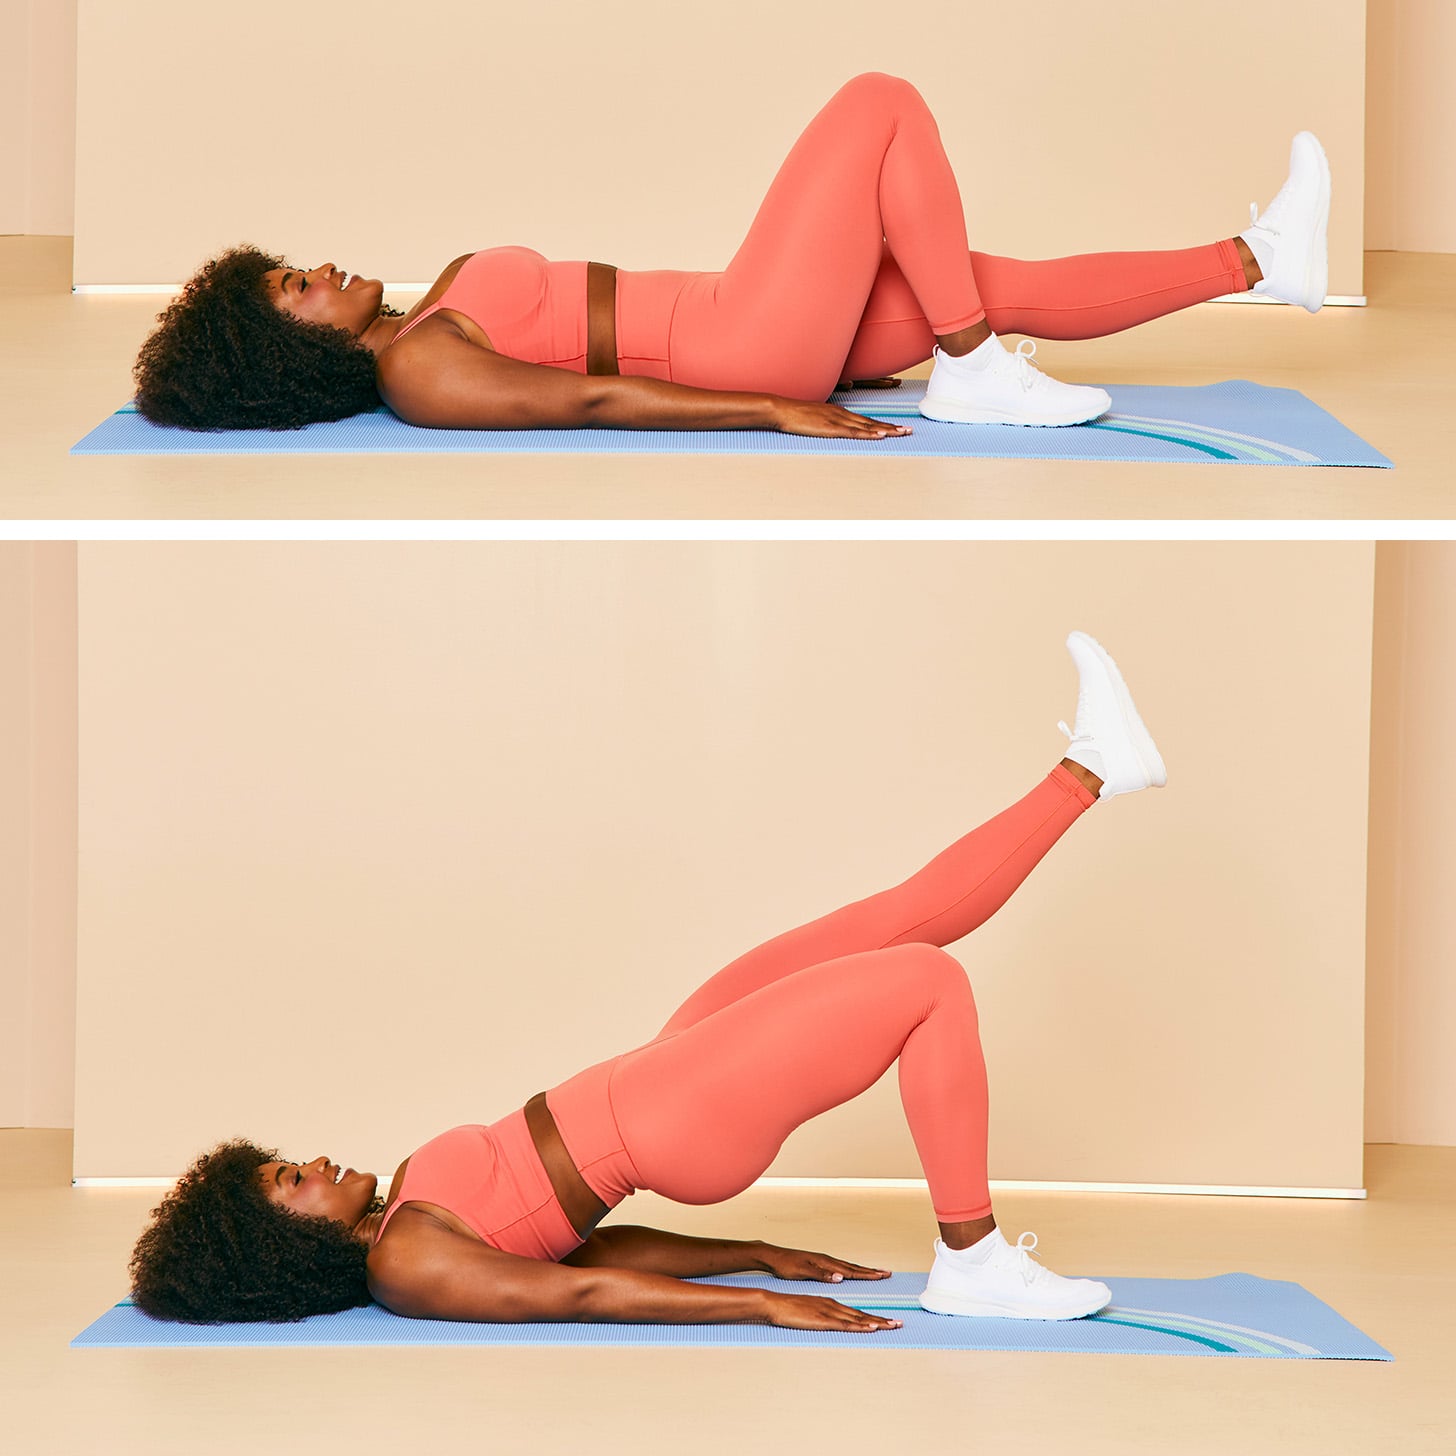 The Best Glute Exercise - The Glute Bridge